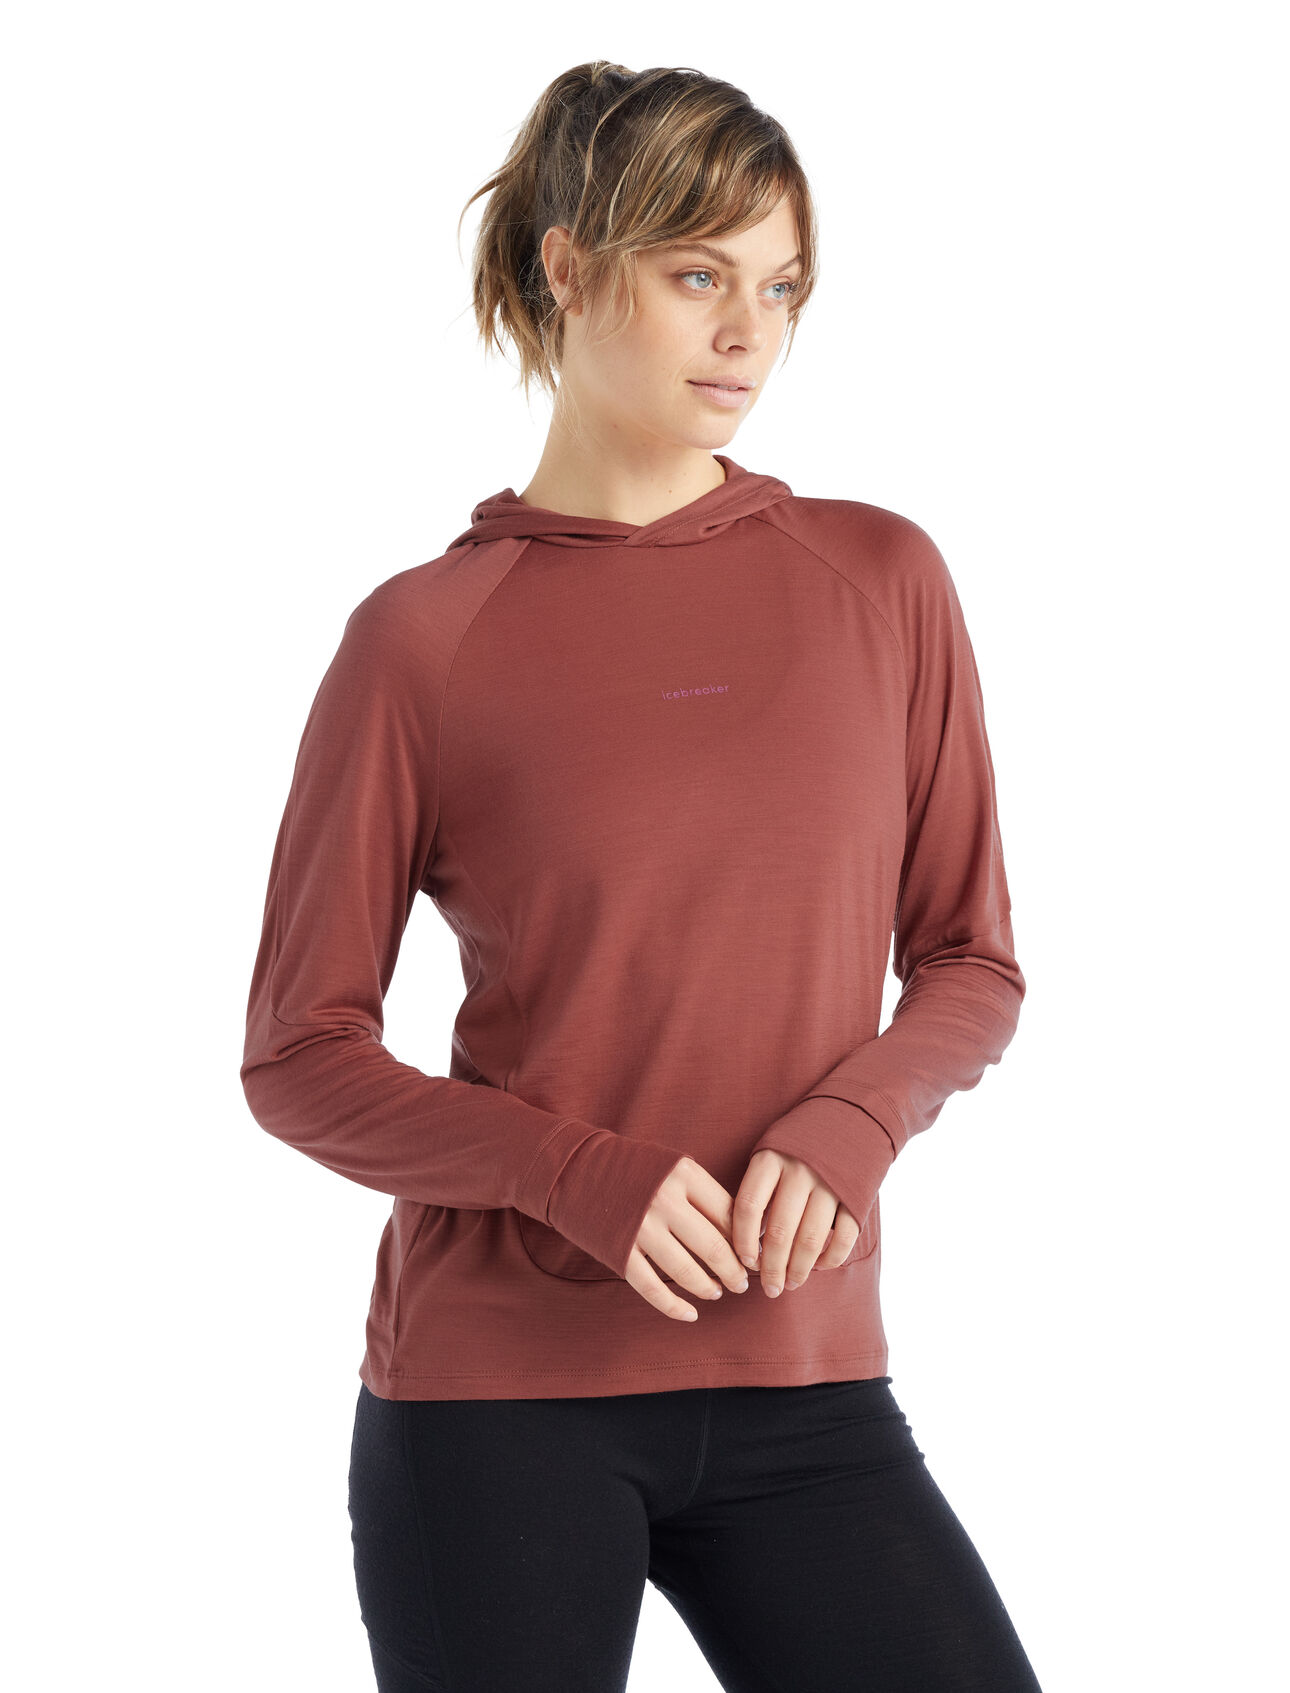 Womens Cool-Lite™ Merino Long Sleeve Hoodie A lightweight and breathable performance hoodie designed for aerobic days outside, the Cool-Lite™ Long Sleeve Hoodie features our moisture-wicking Cool-Lite™ merino jersey fabric.